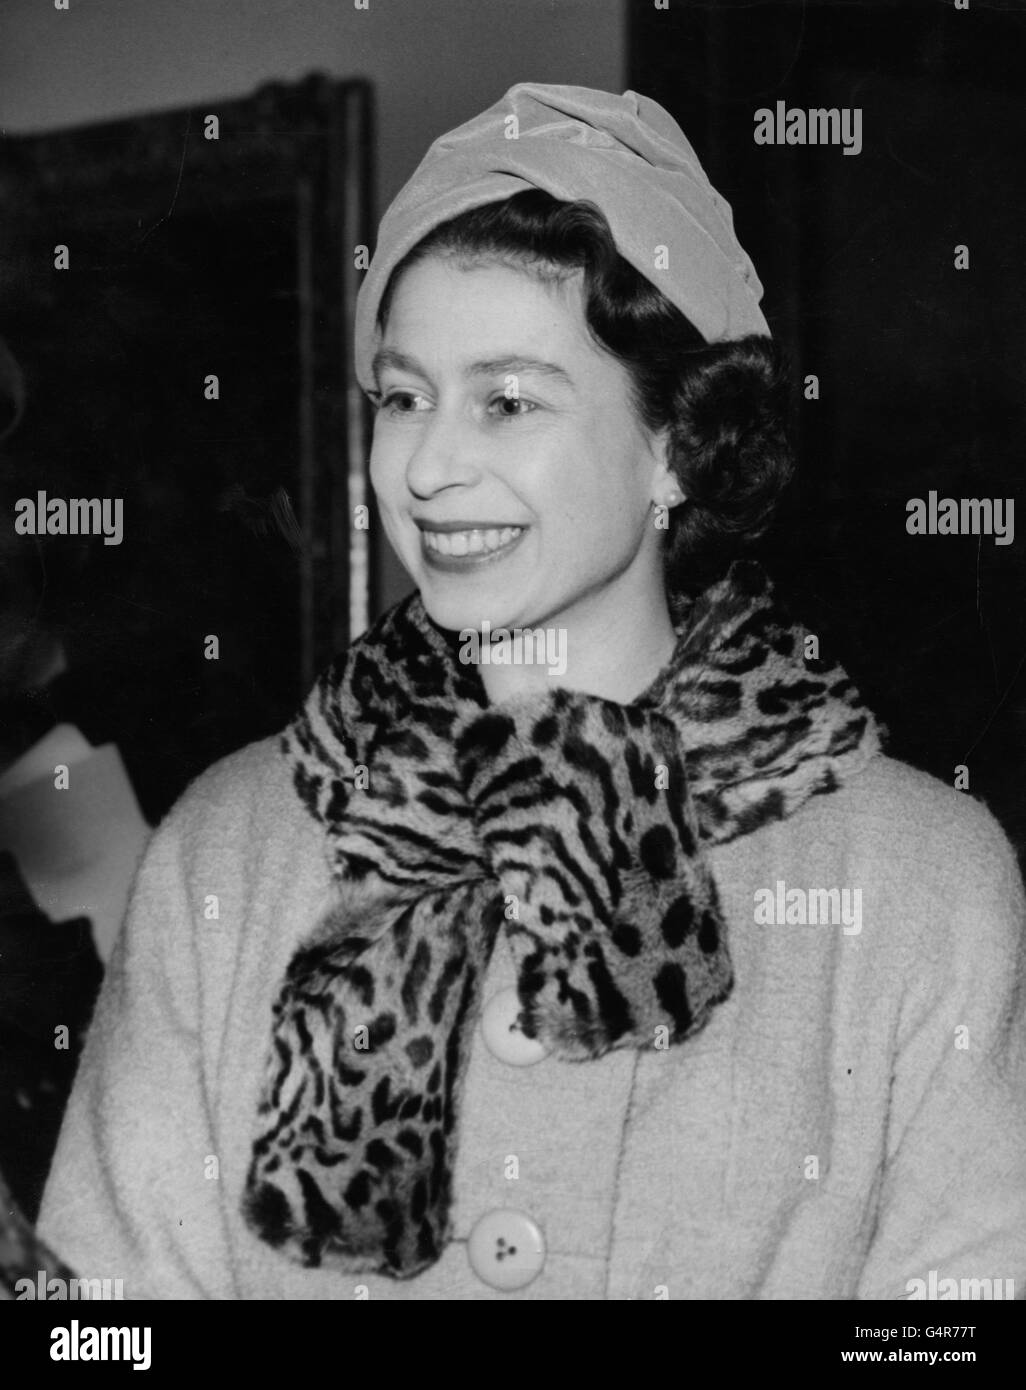 Queen Elizabeth II during her visit to the art collections at the Cortauld Institute of Art, London University. Stock Photo